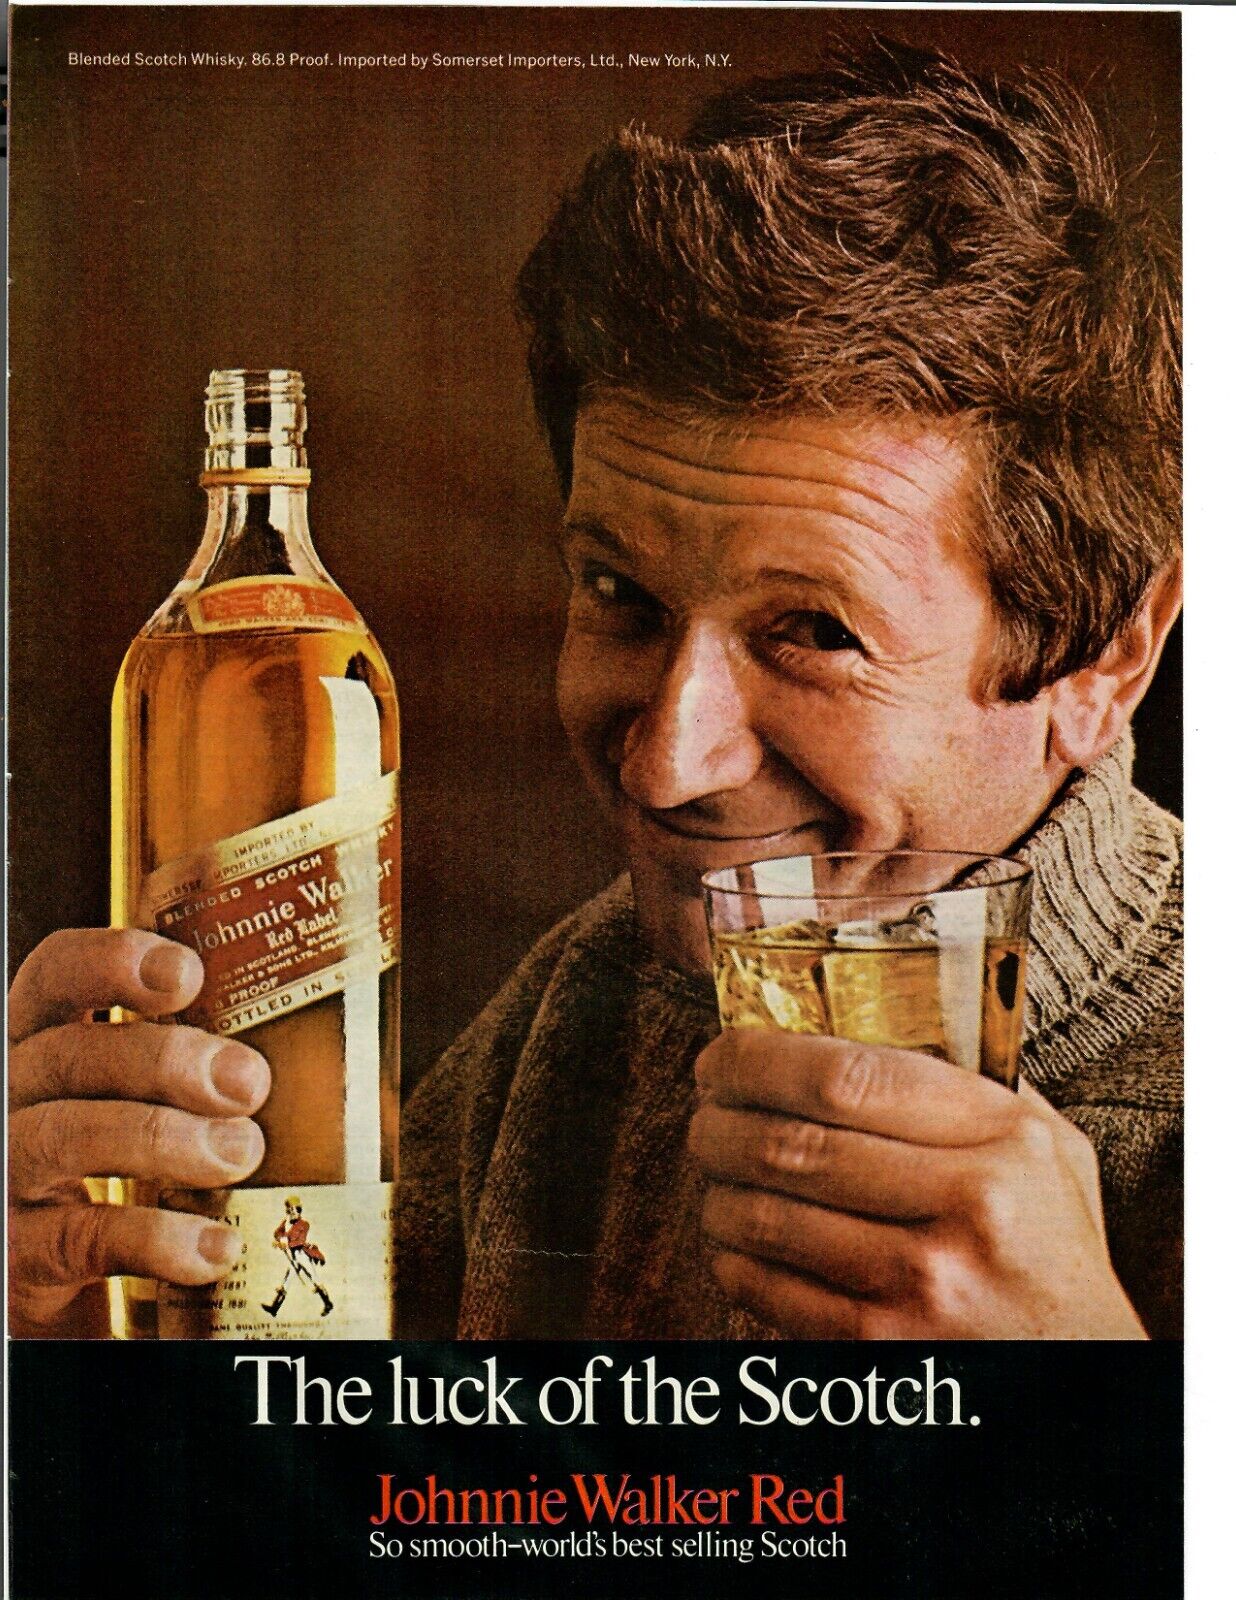 1969 Johnnie Walker Red Scotch Vintage Print Ad The Luck of The Scotch